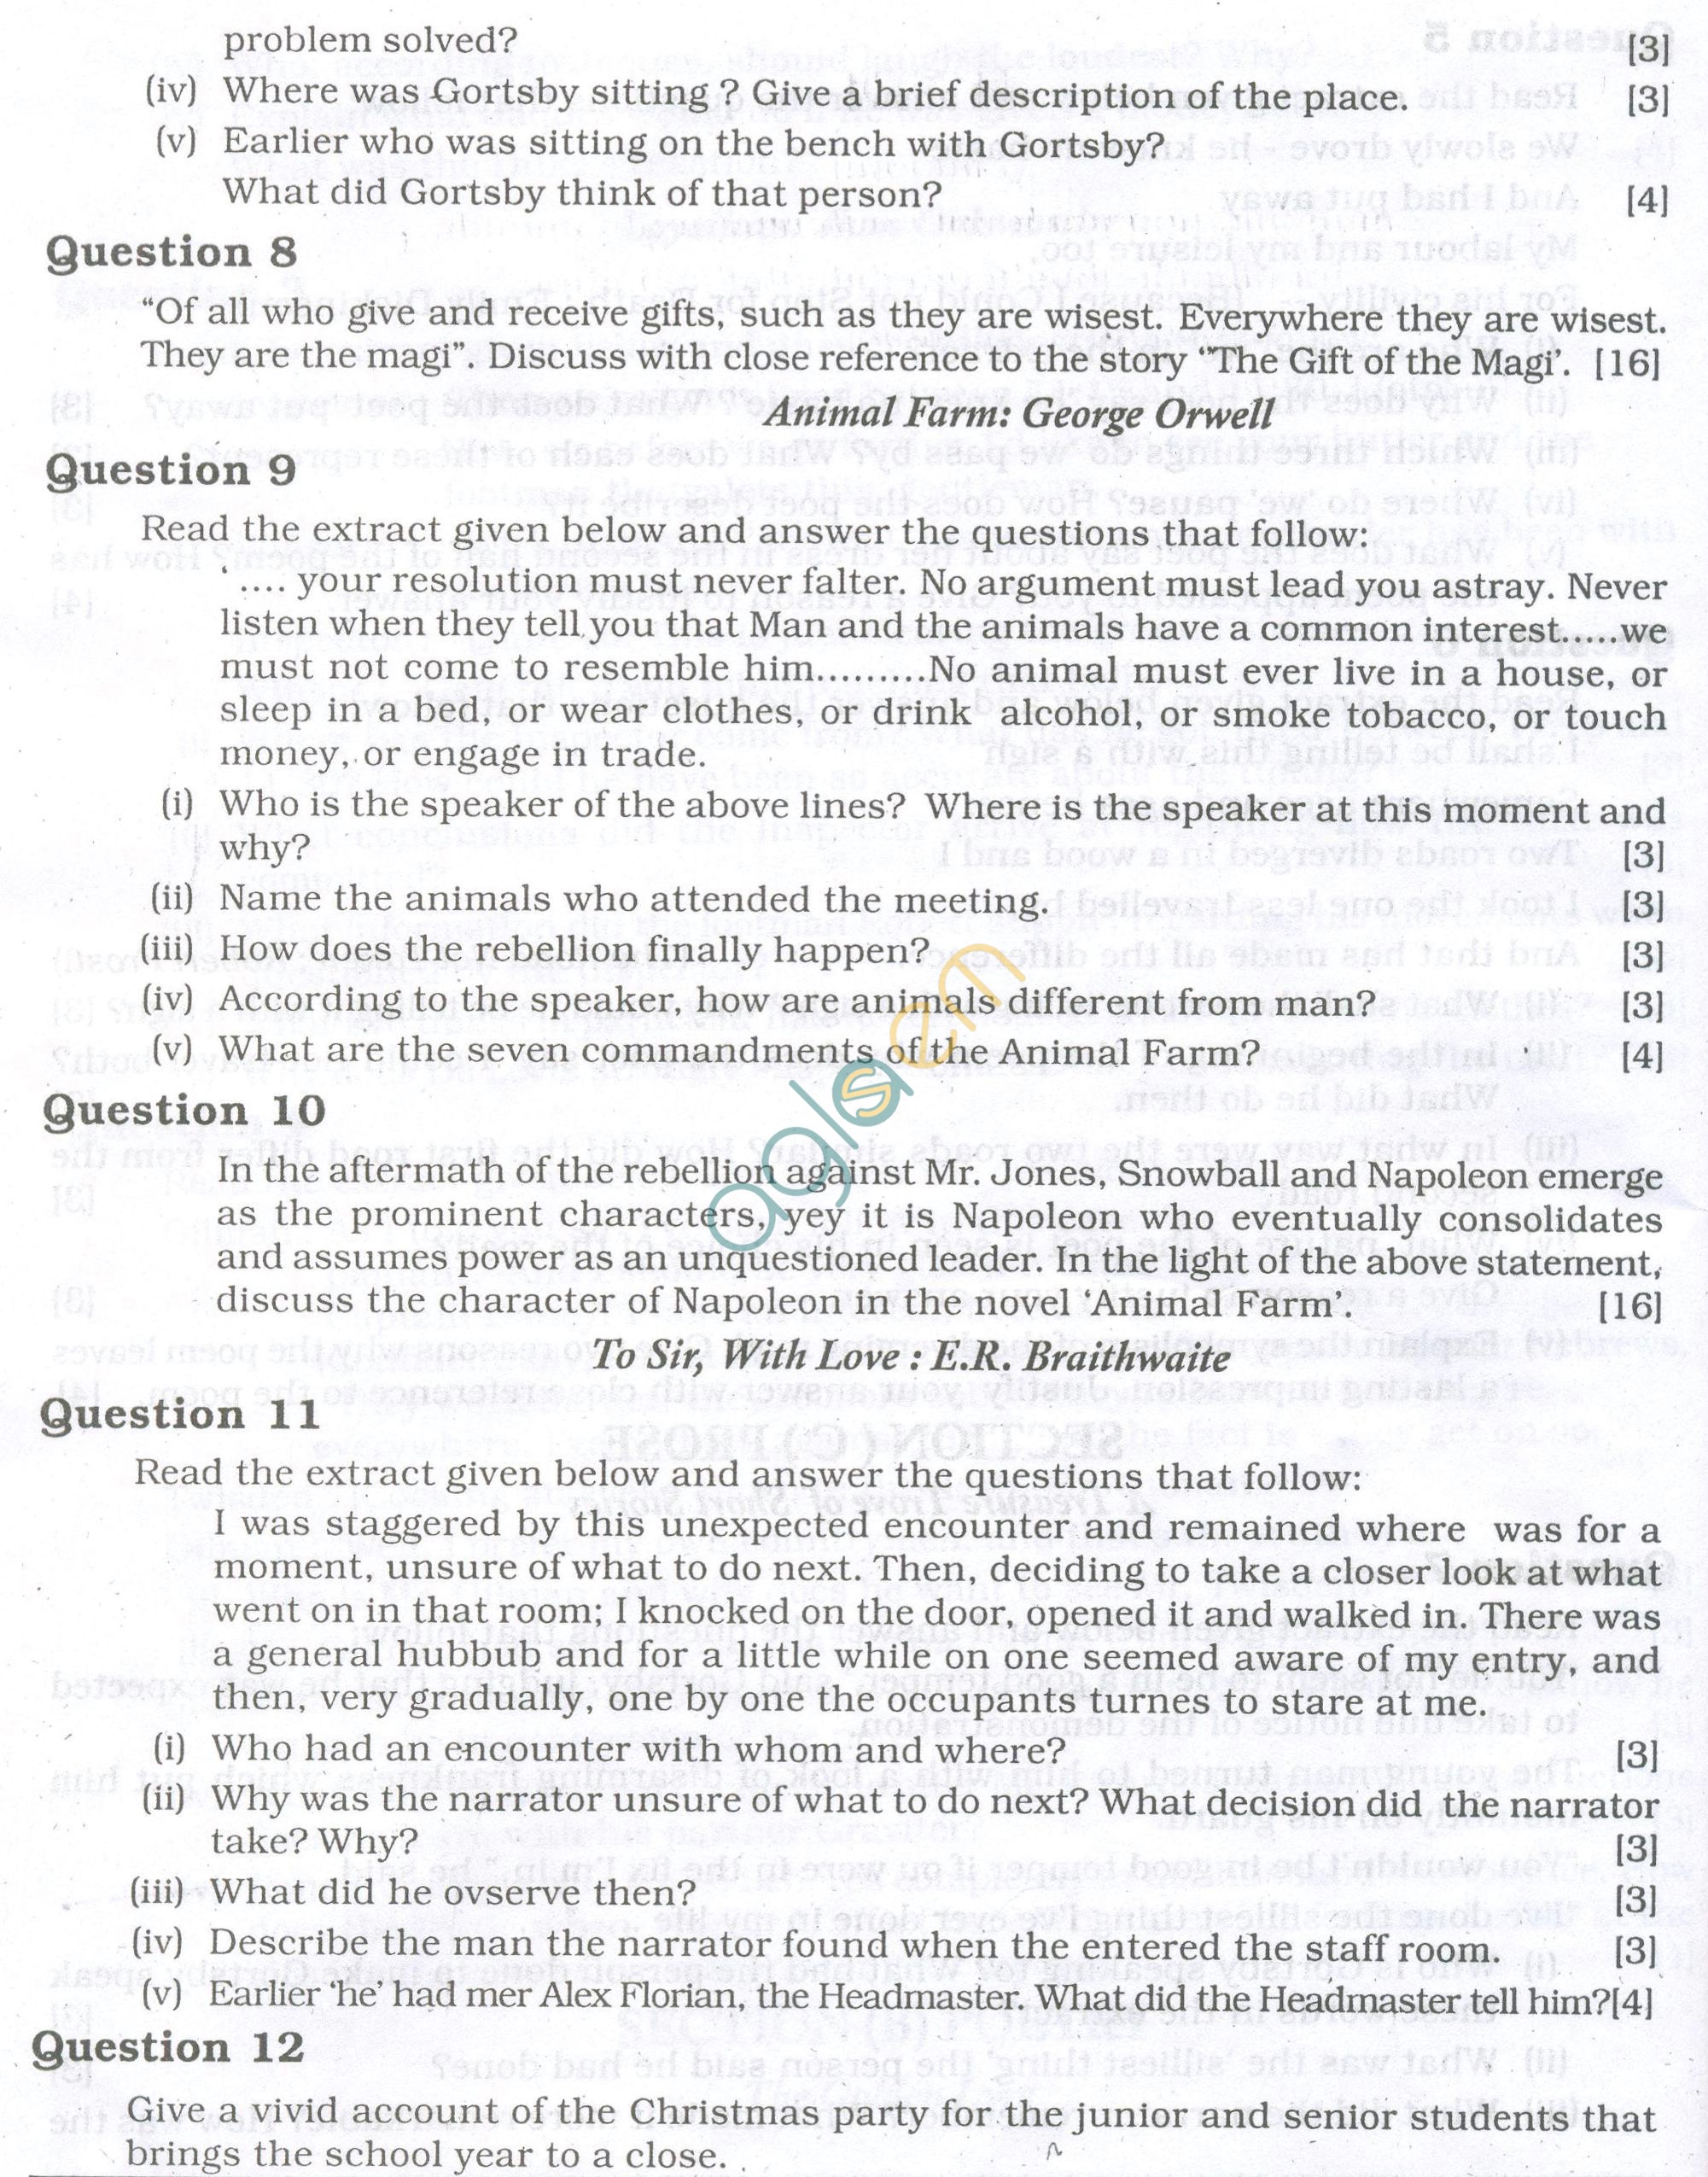 ICSE Question Papers 2013 for Class 10 - English Paper - 2/